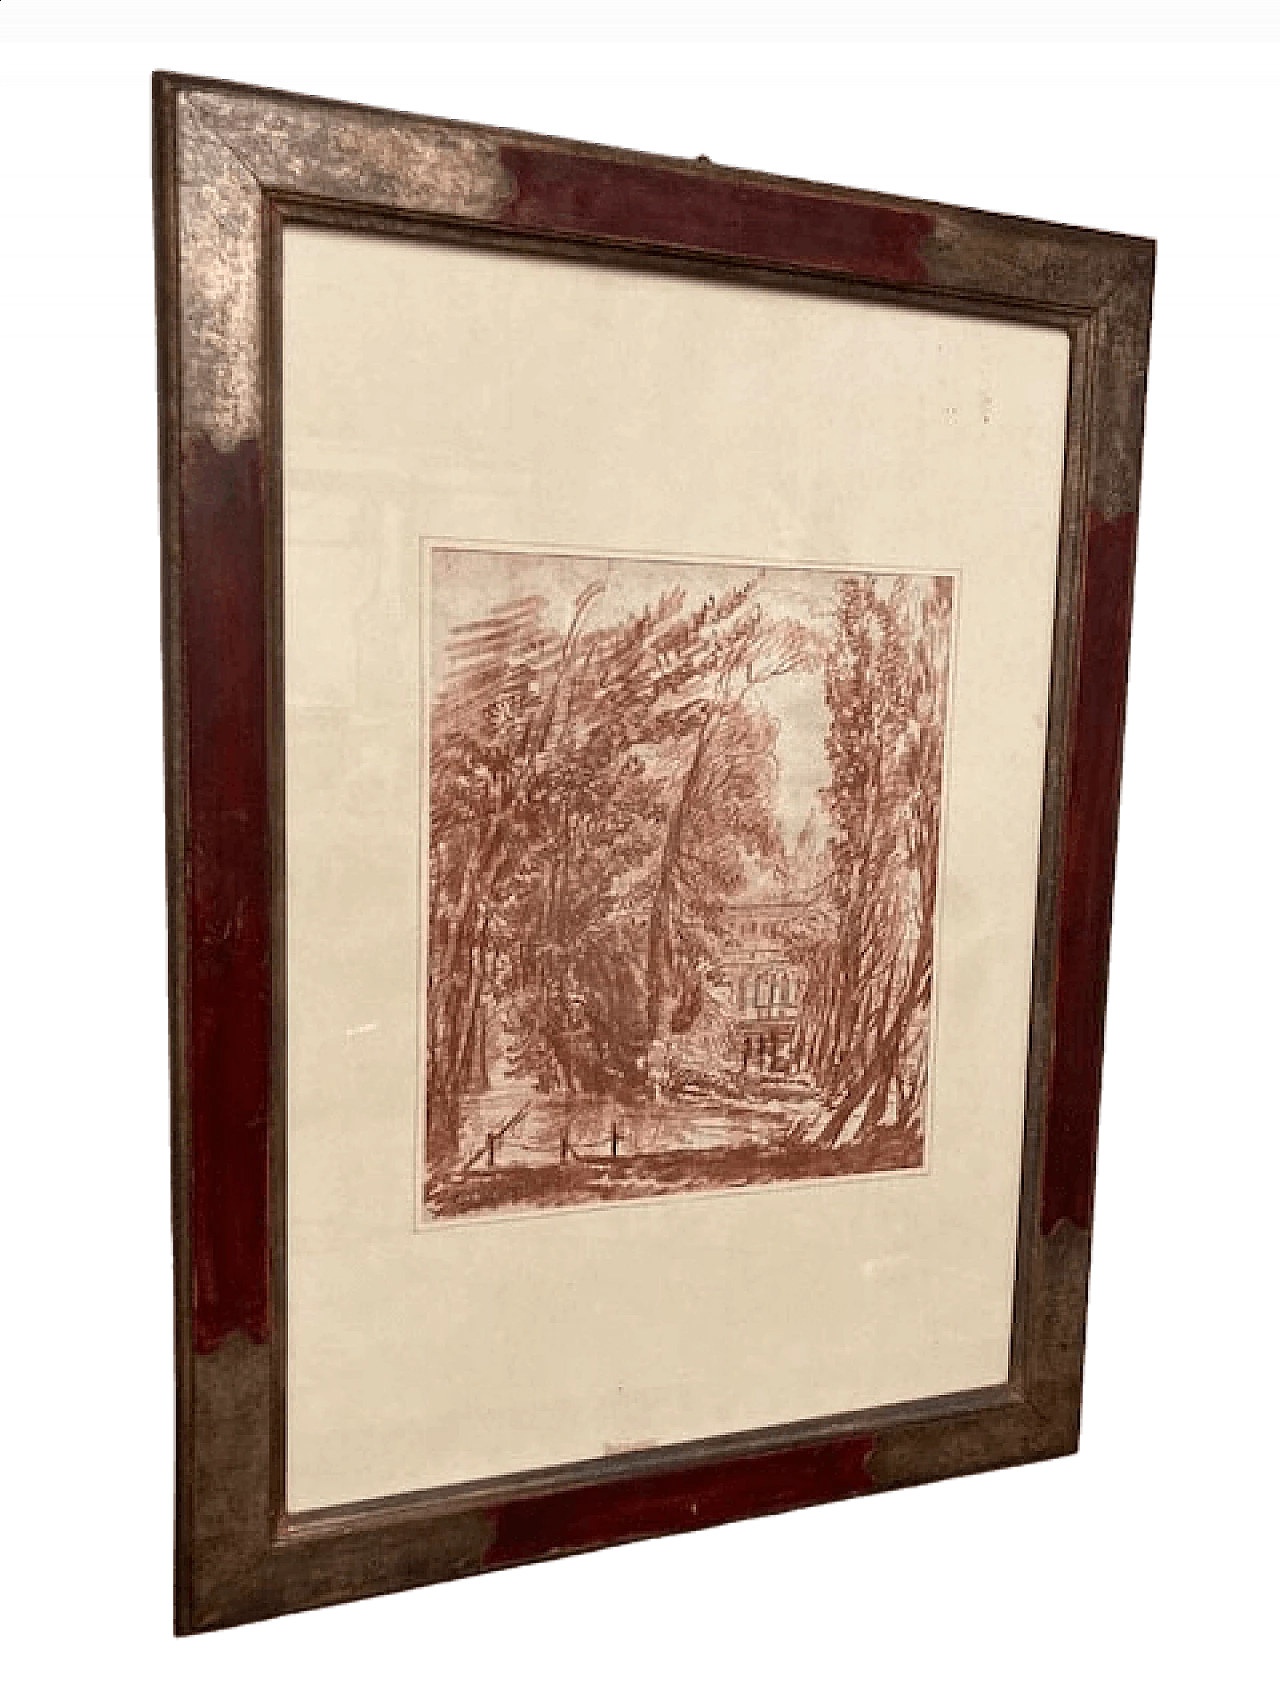 Sanguine pencil drawing of landscape, mid-19th century 10